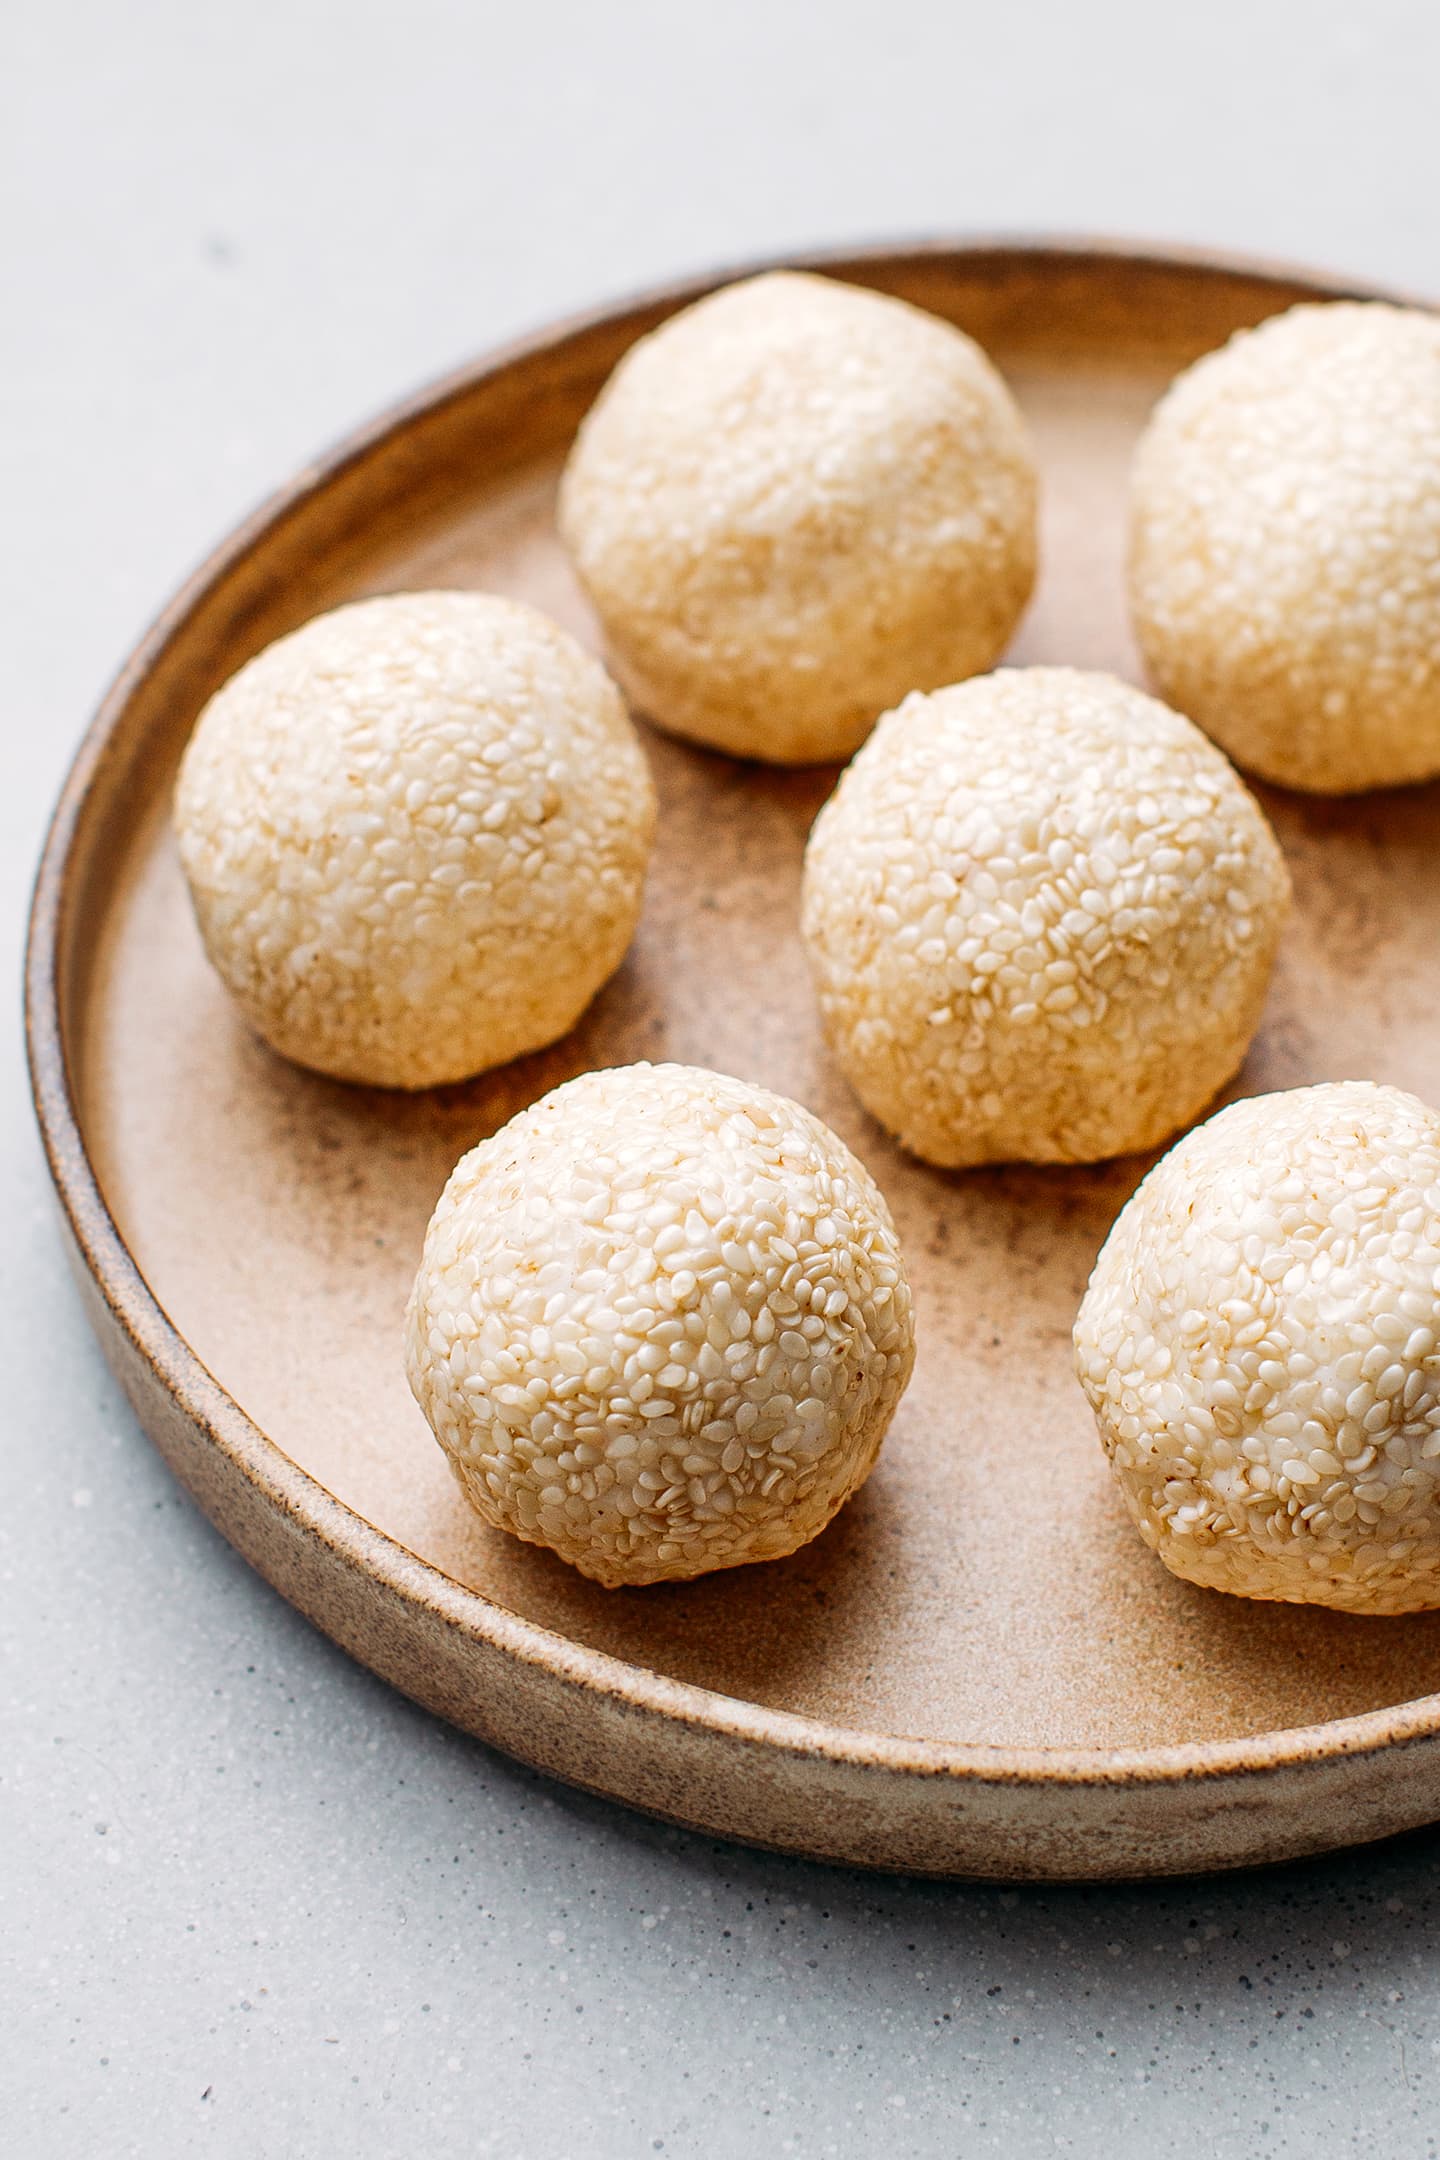 Sesame-coated balls on a plate.